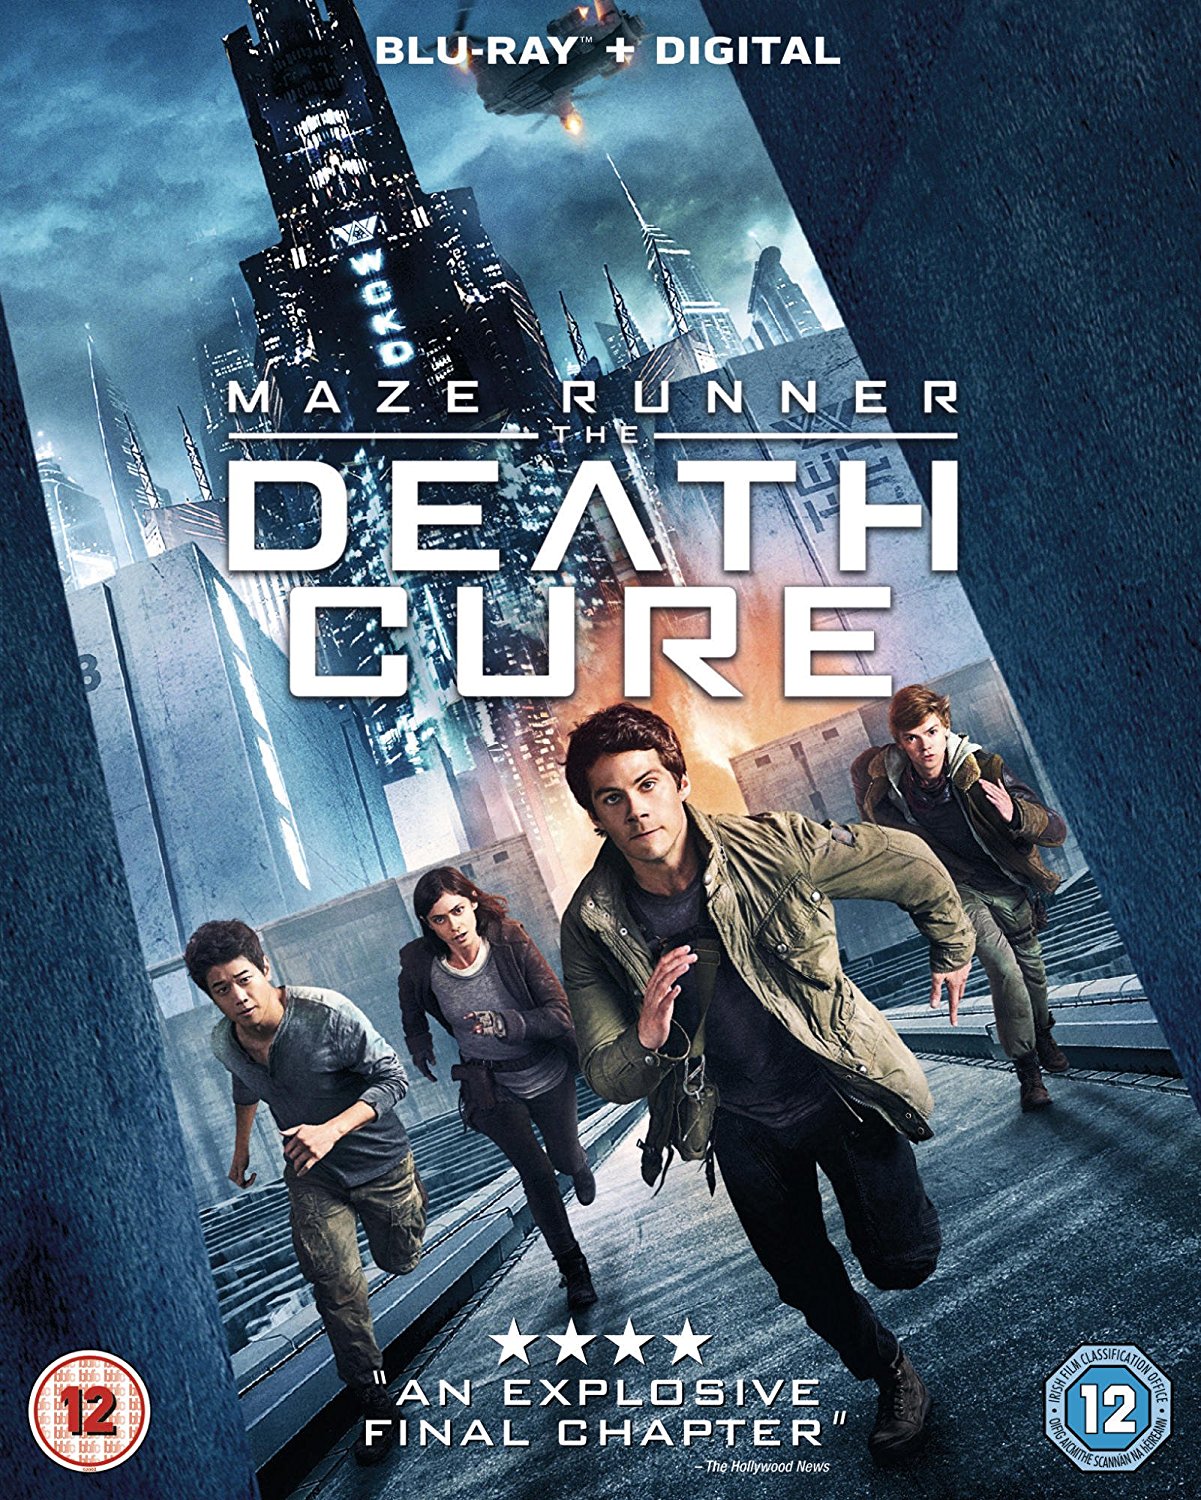 boom competitions - win Maze Runner: the Death Cure on Blu-ray